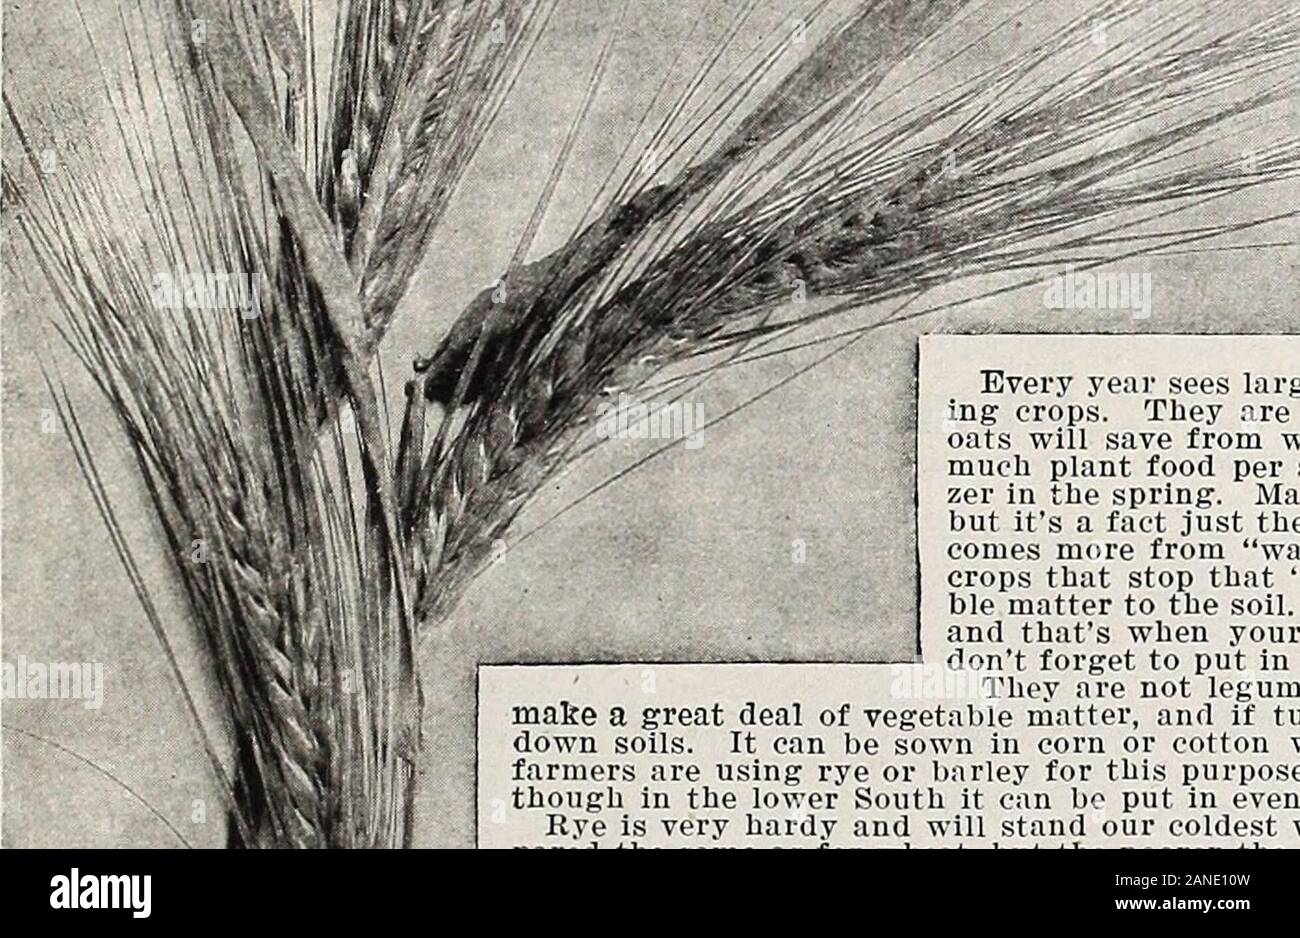 Hastings' seeds : fall 1914 catalogue . time seems rather slow work, it is really more expeditious thanit seems, while the assurance of securing thereby a certain cropshould more than reconcile the planter to the delay. With the openfurrow method liberal fertilization is advisable on planting andalso an additional top-dressing of nitrate of soda in early springsay 75 pounds per acre. Besides oats the process can be usedequally well with other grains and permit wheat to be sown in tneSouth as late as the middle of December. We have spoken before of drilling in oats between the cottonrows. This Stock Photo